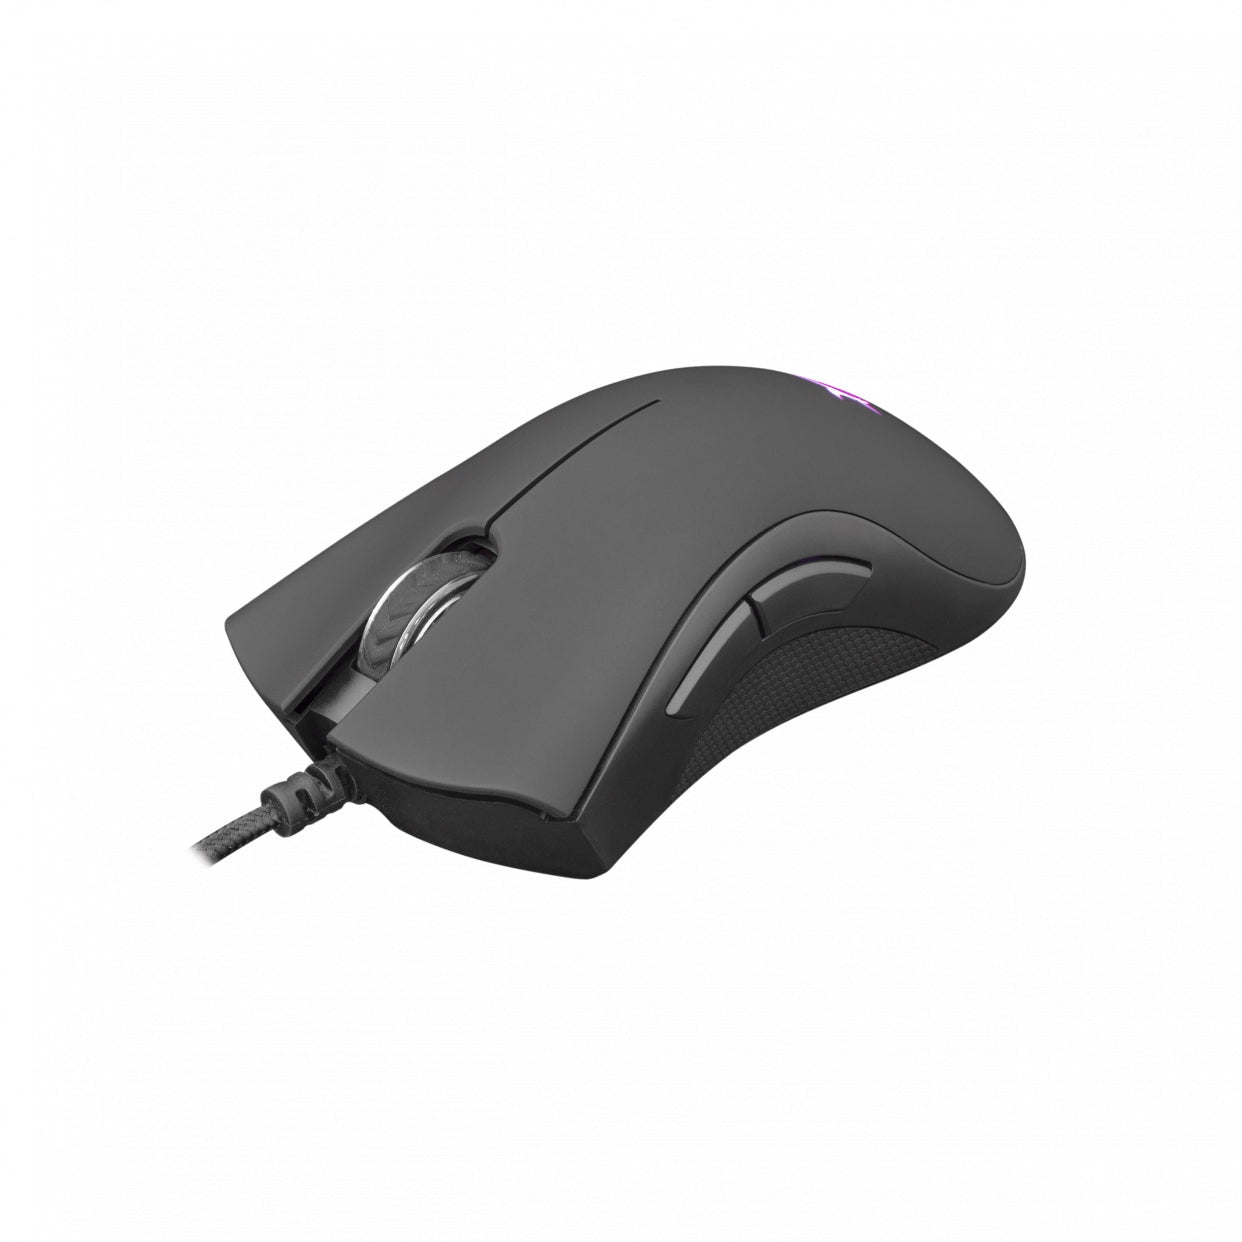 White Shark GM-5008 Gaming Mouse Hector  Black